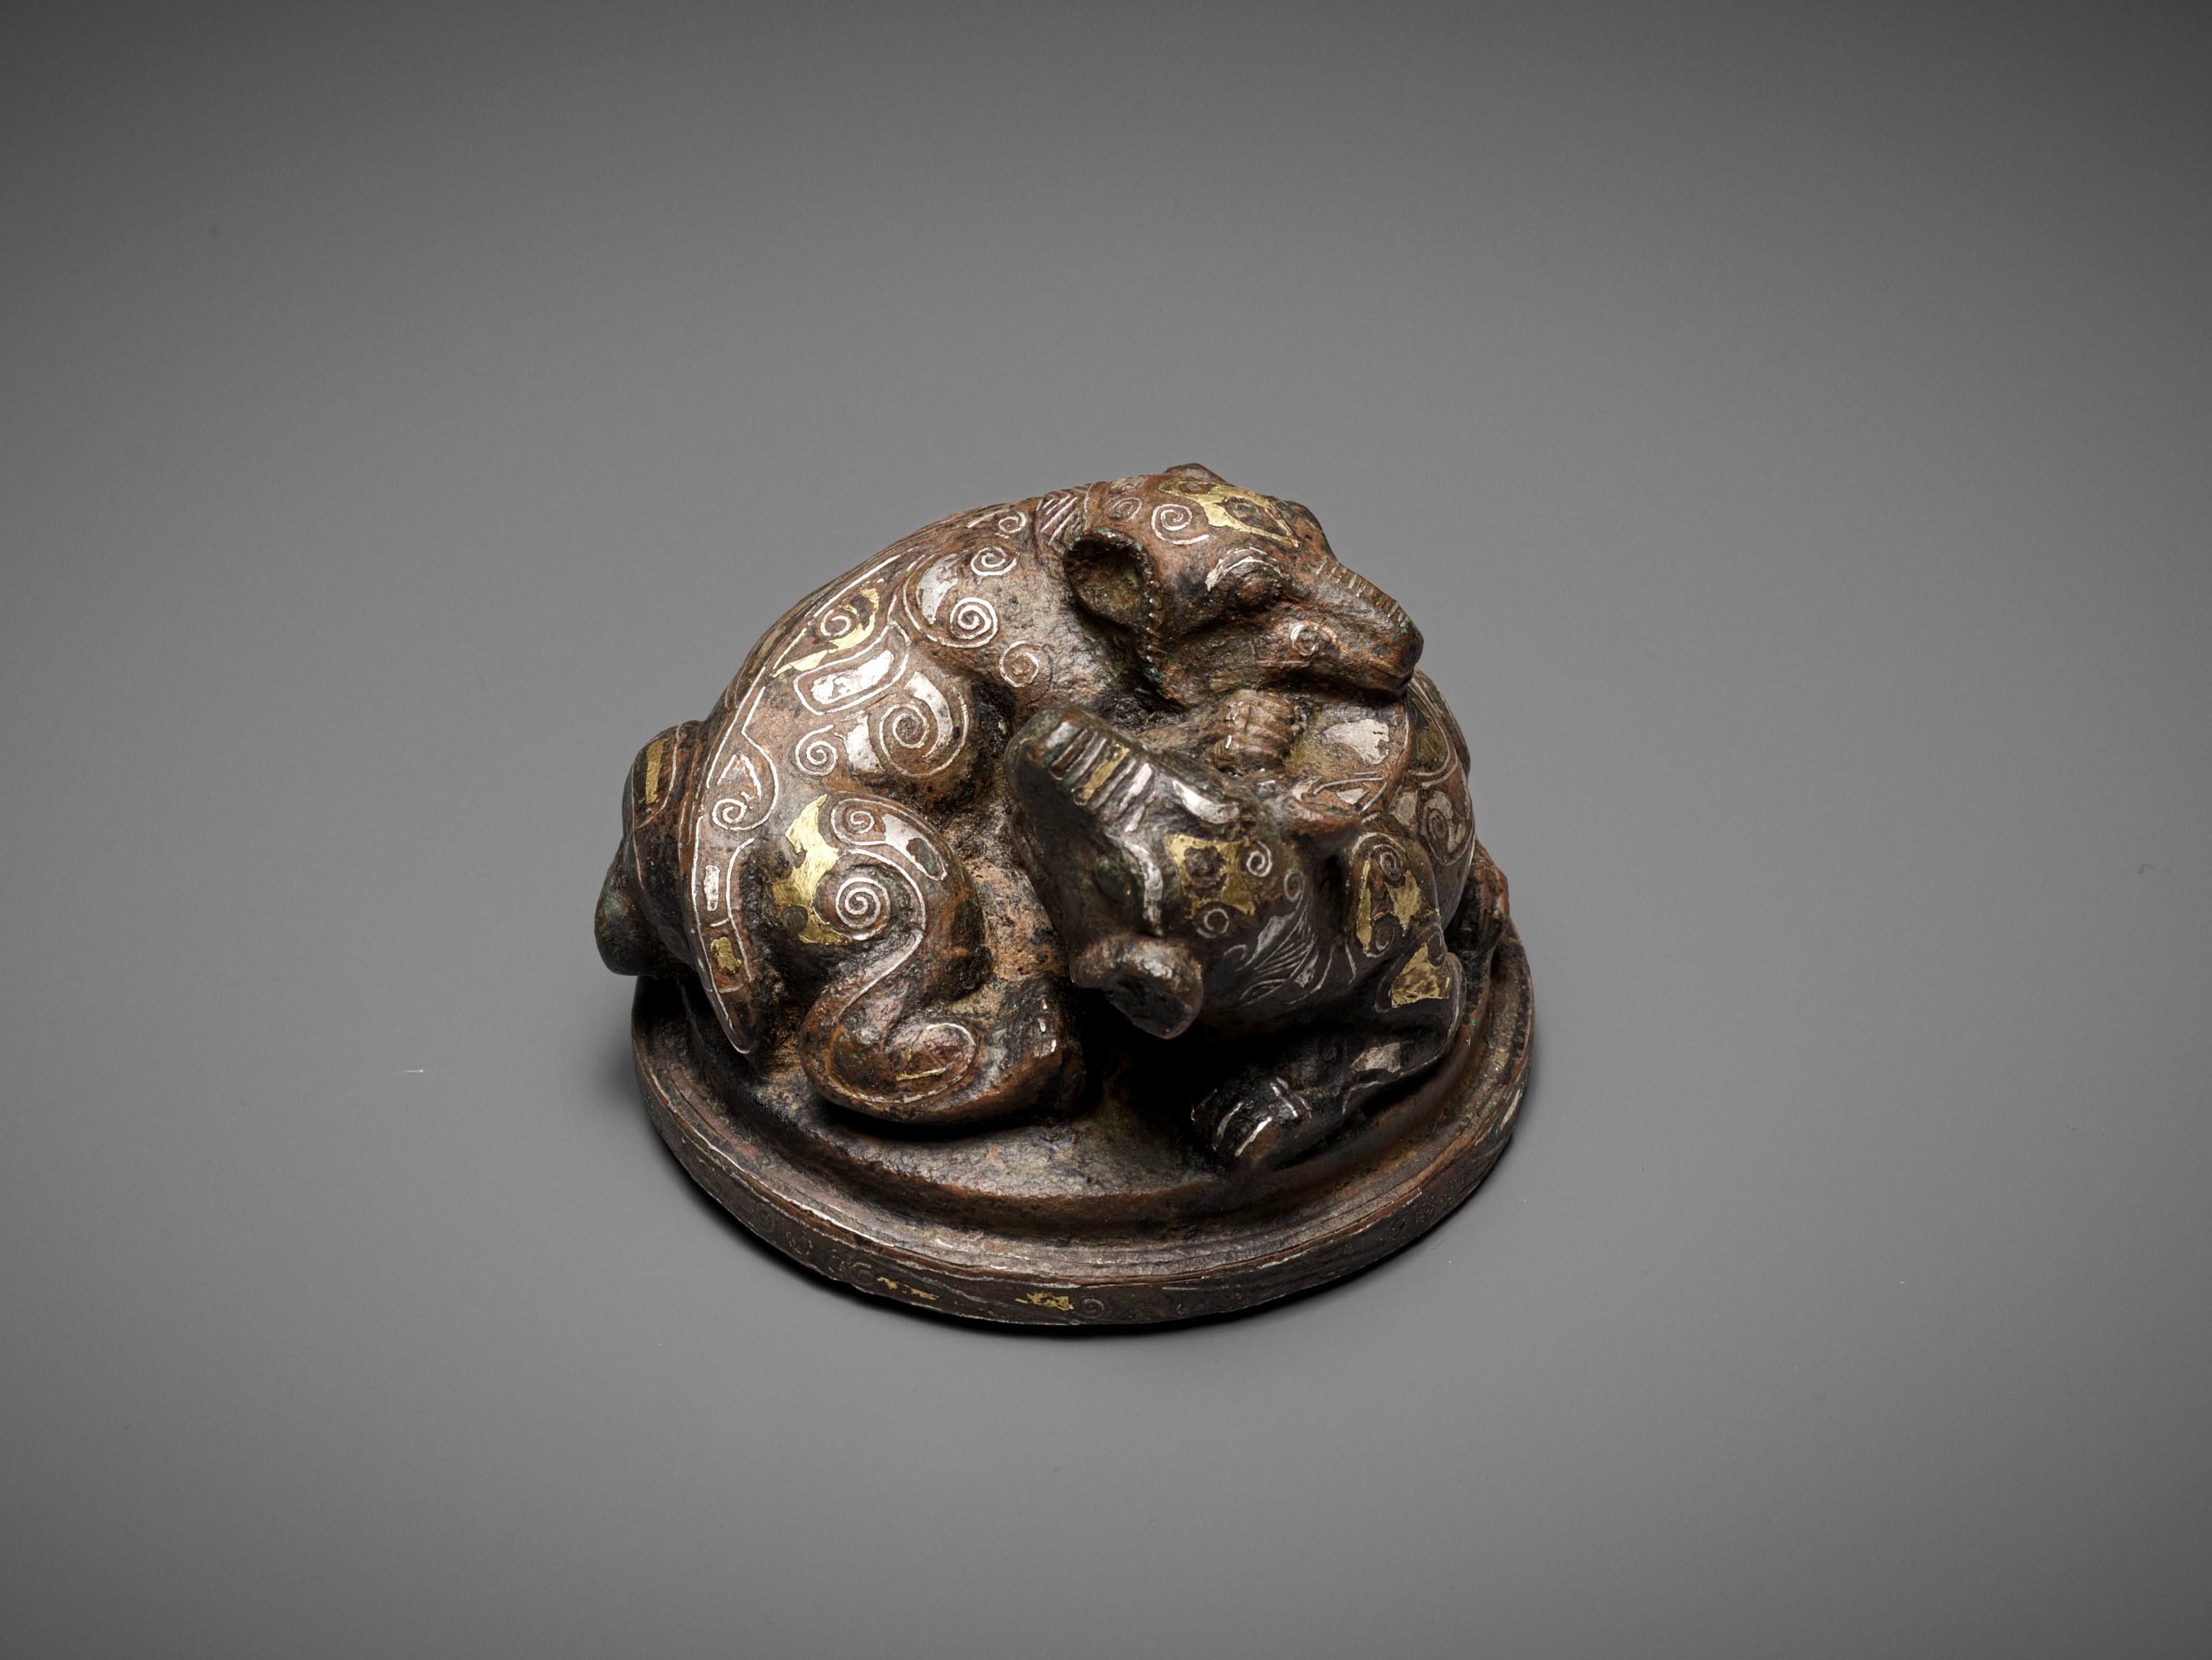 A GOLD AND SILVER-INLAID 'FIGHTING BEARS' BRONZE MAT WEIGHT, WARRING STATES TO HAN DYNASTY - Image 2 of 12